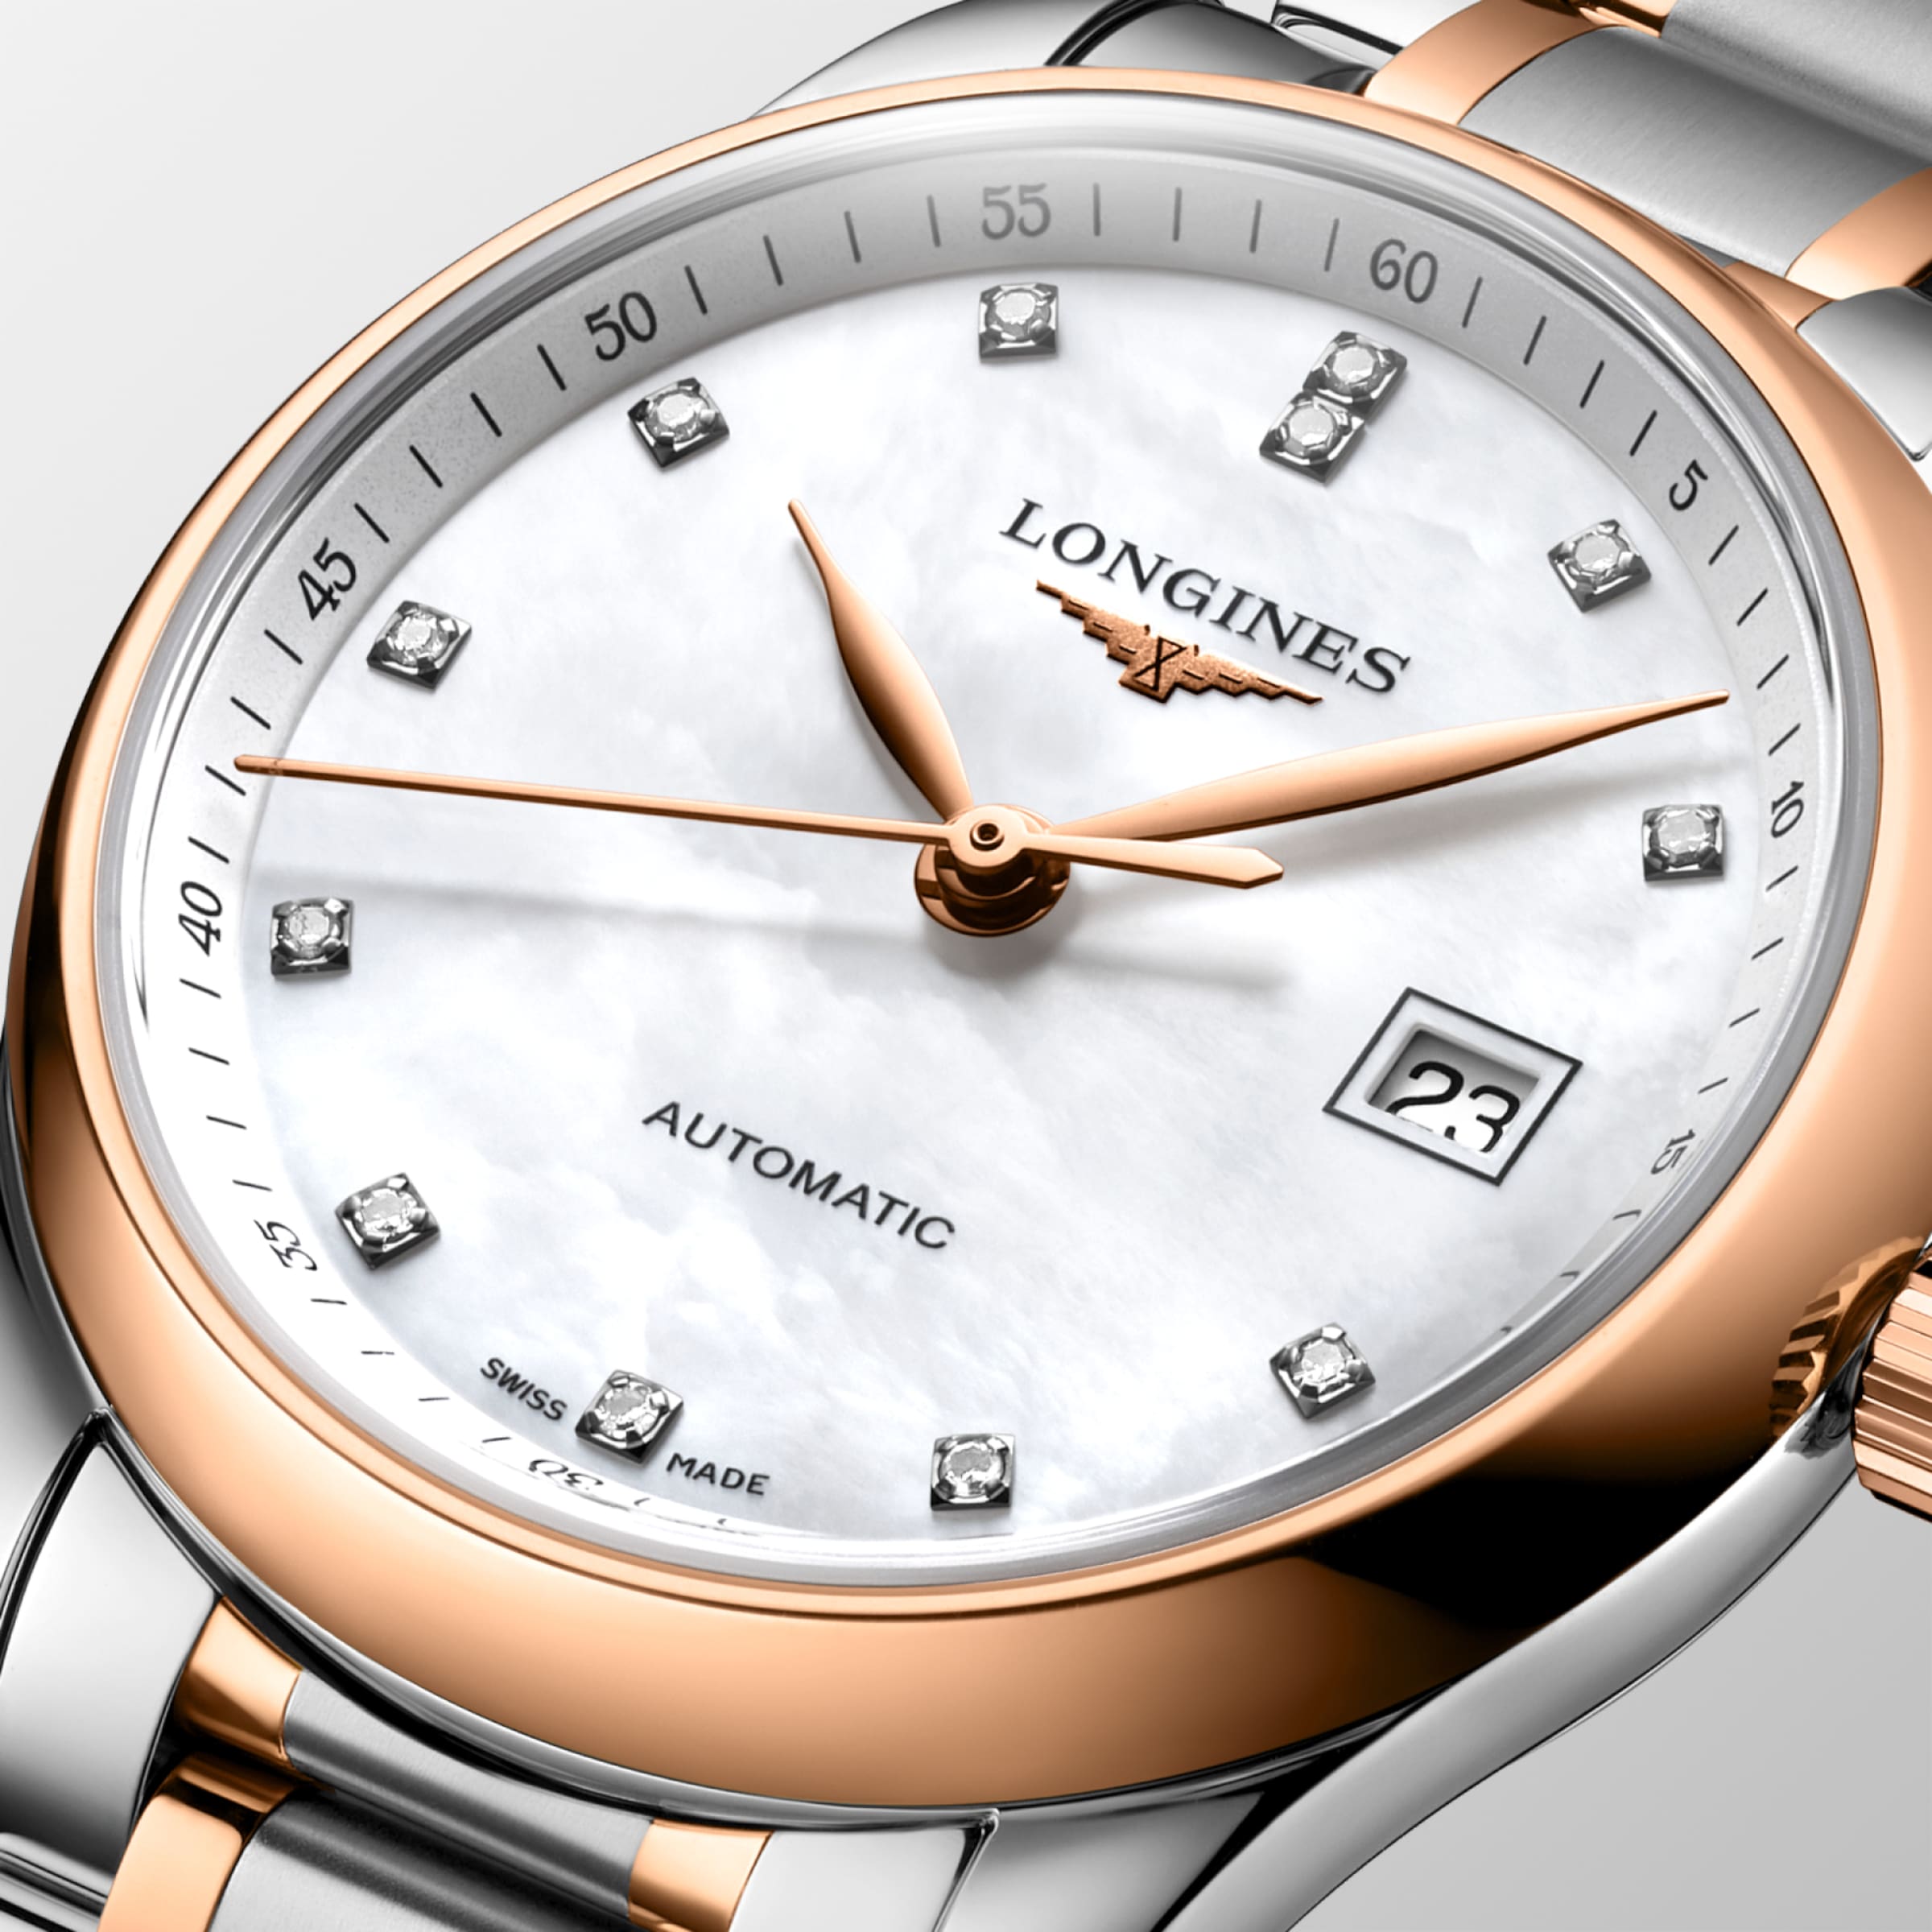 Longines MASTER COLLECTION Automatic Stainless steel and 18 karat pink gold cap 200 Watch - L2.257.5.89.7